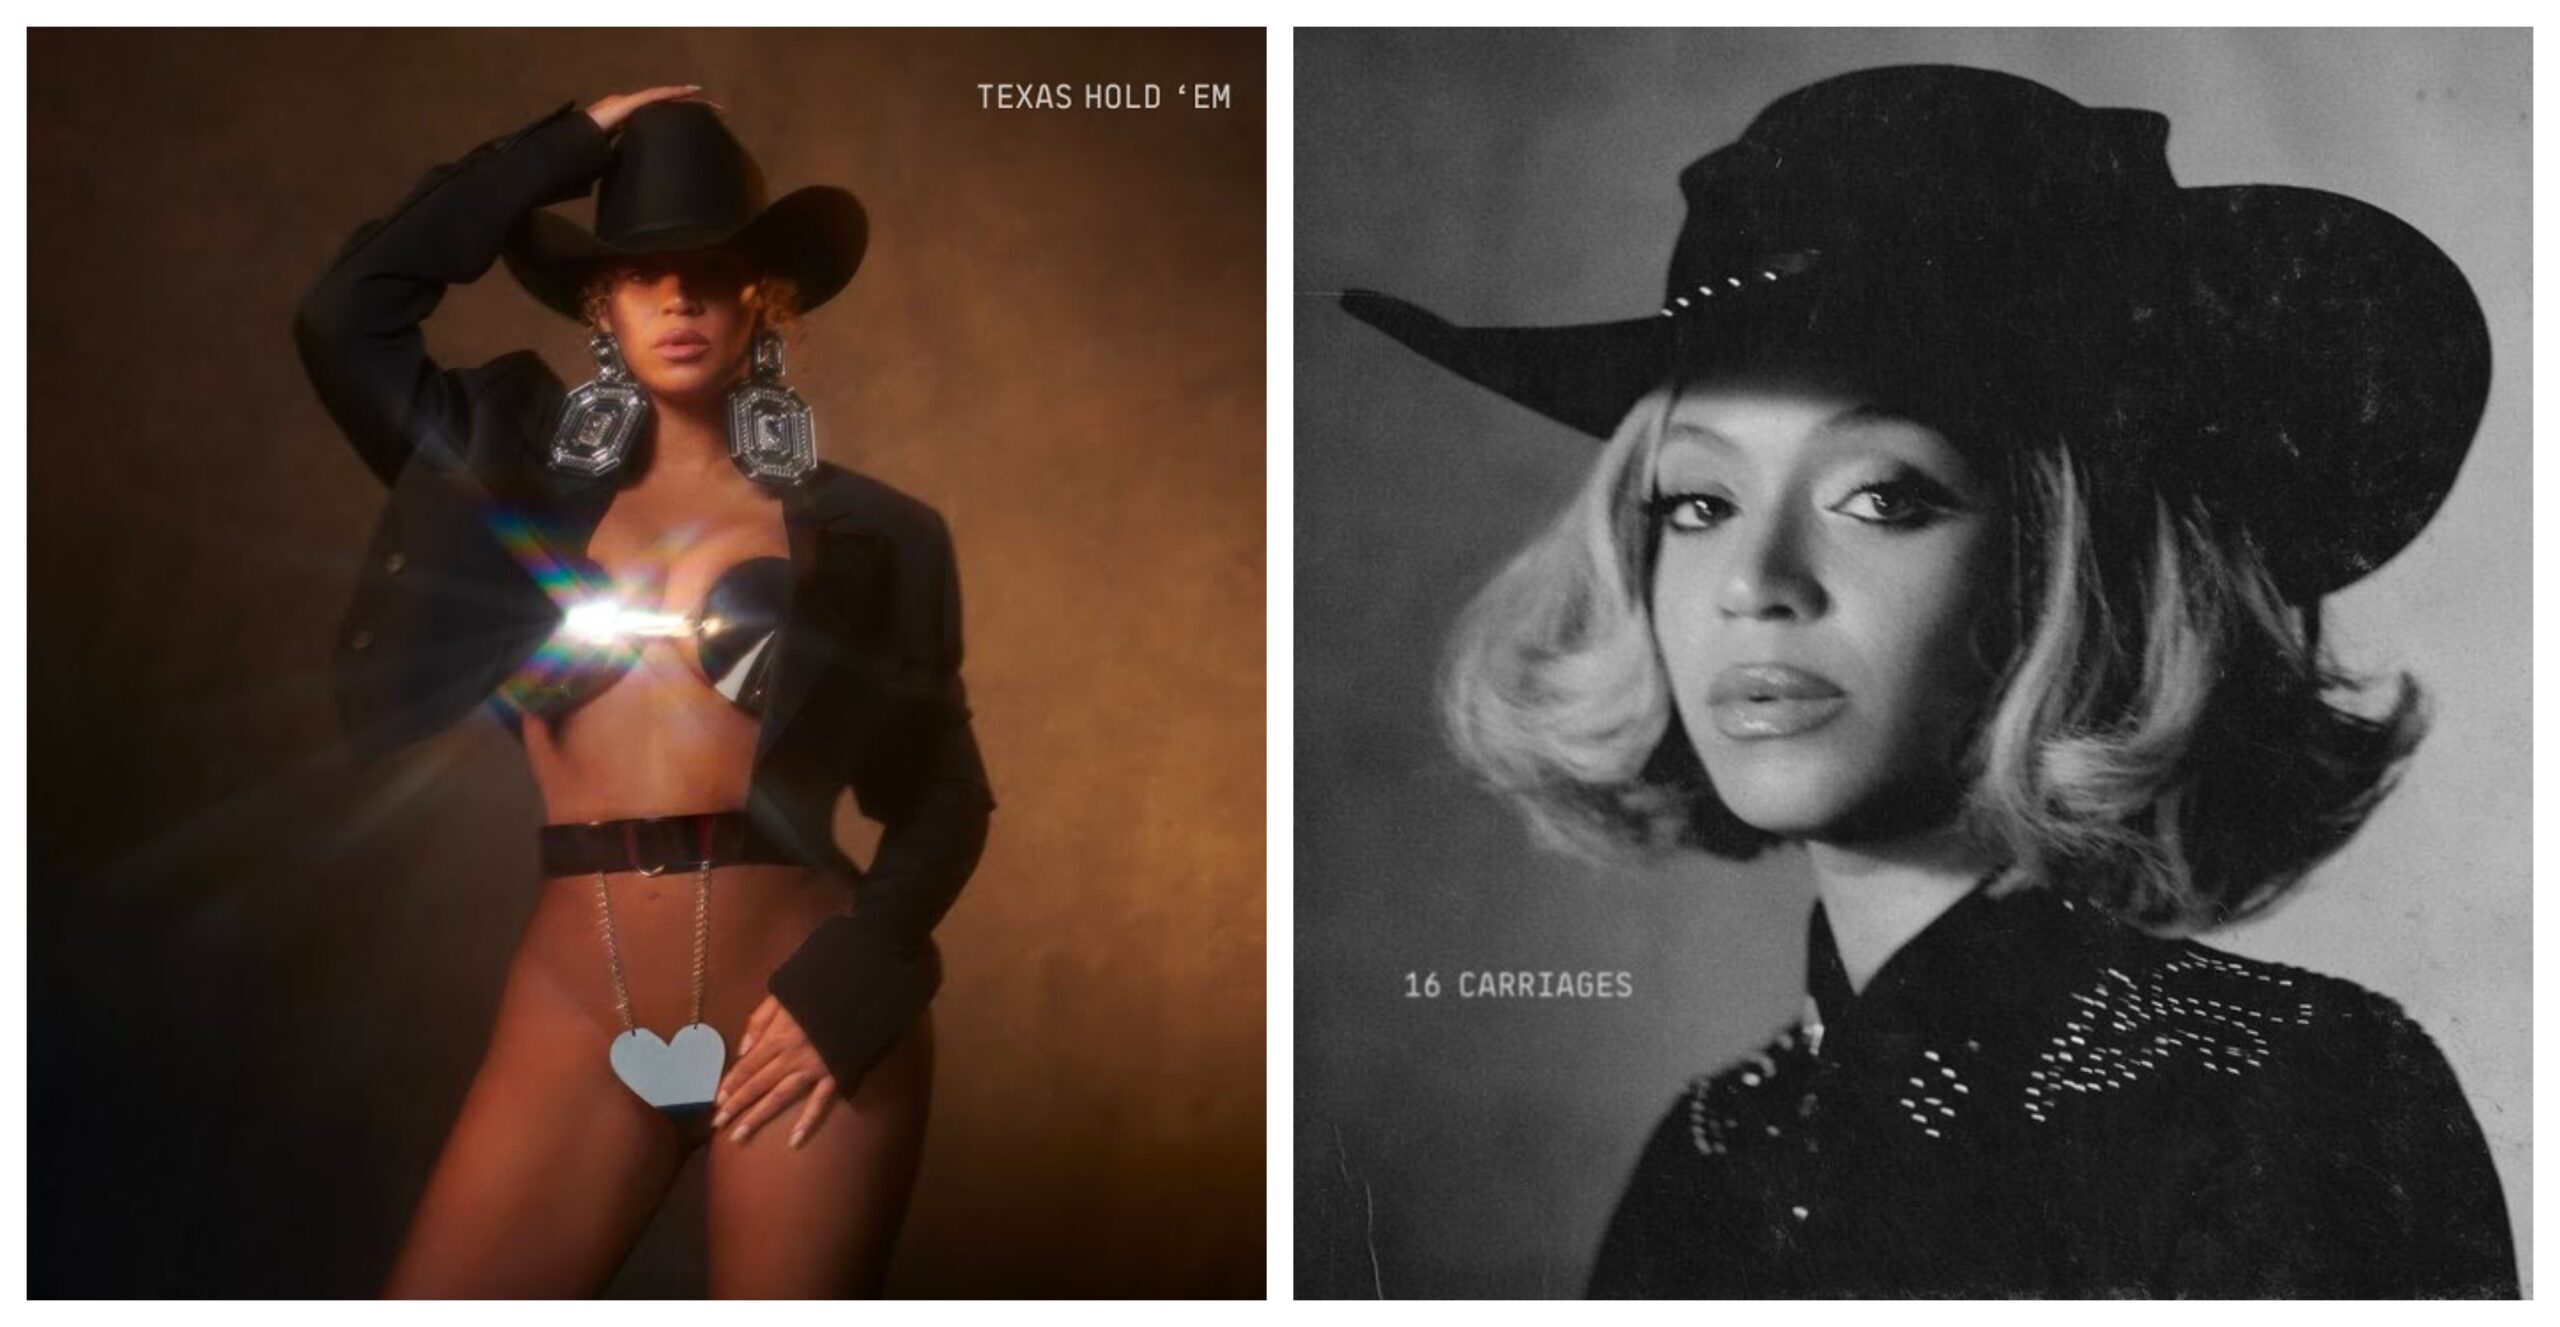 Beyonce’s ‘Texas Hold ‘Em’ & ’16 Carriages’ Occupy Top Spots of Worldwide iTunes After Dominating Sales Charts of Over 60 Countries